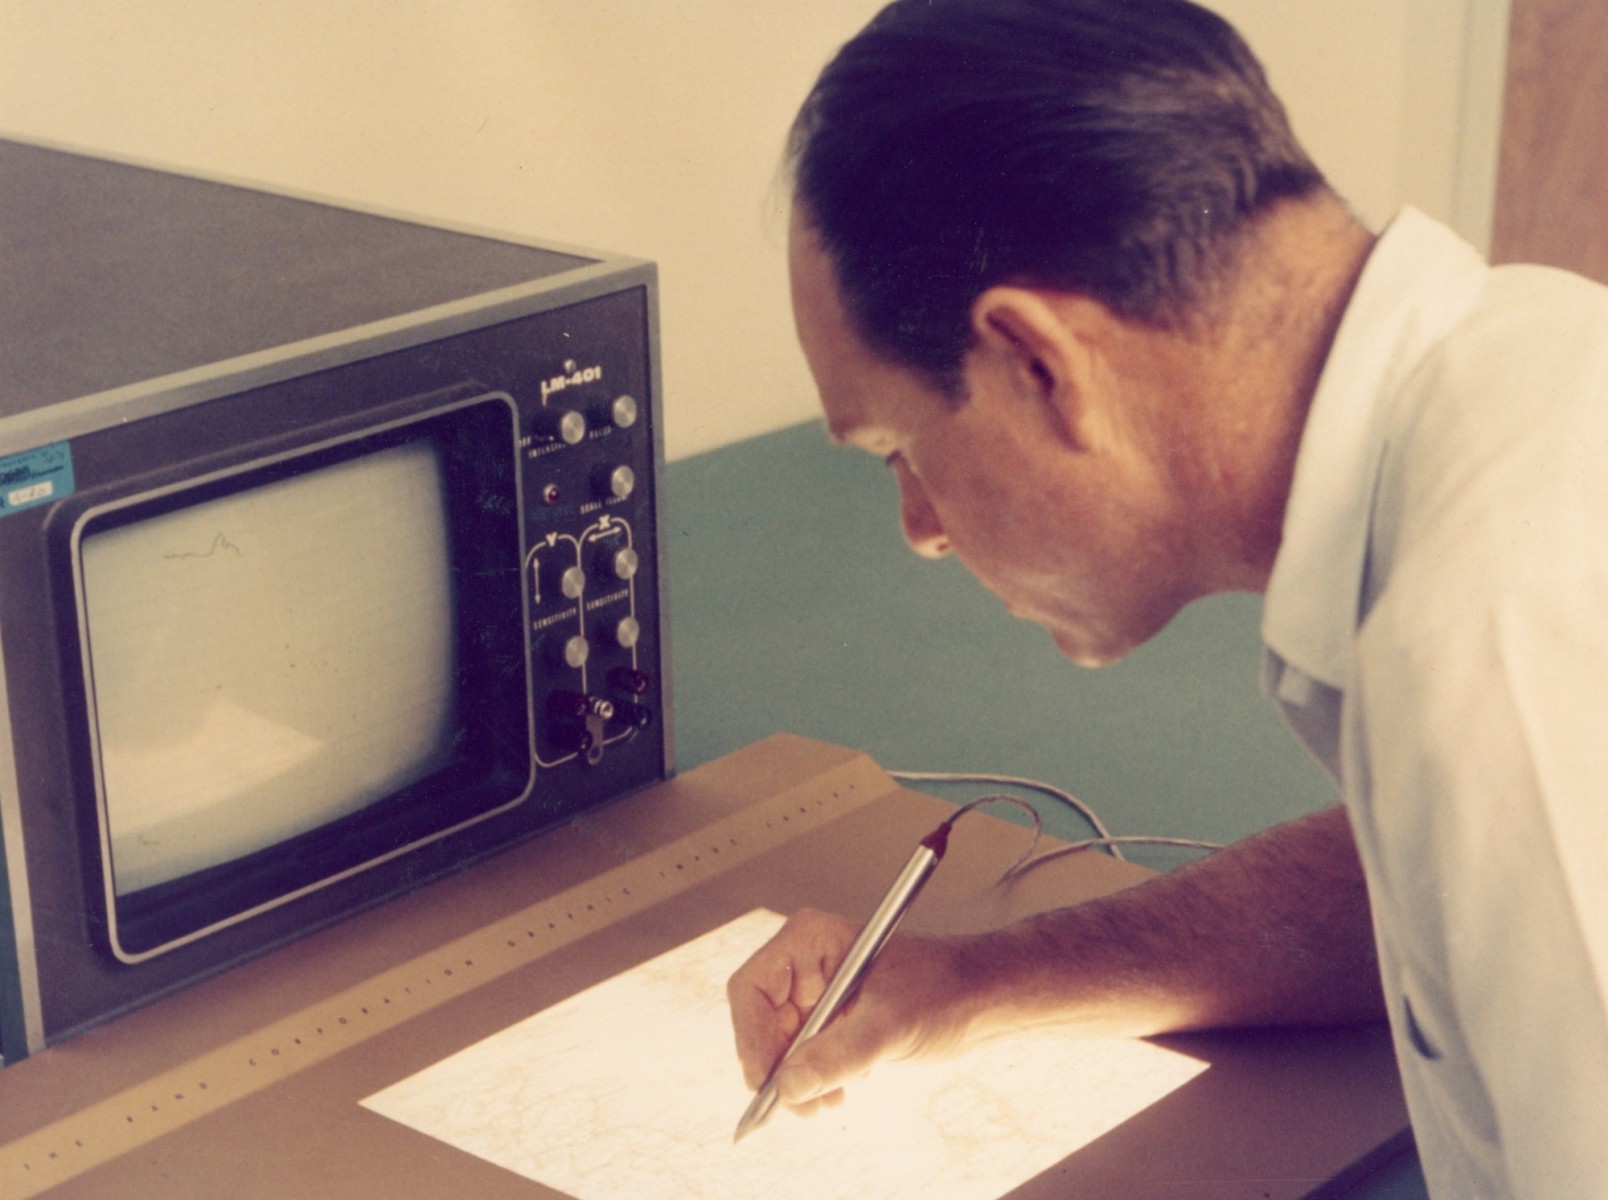 The RAND Tablet in action. Image from RAND Corporation Archives.